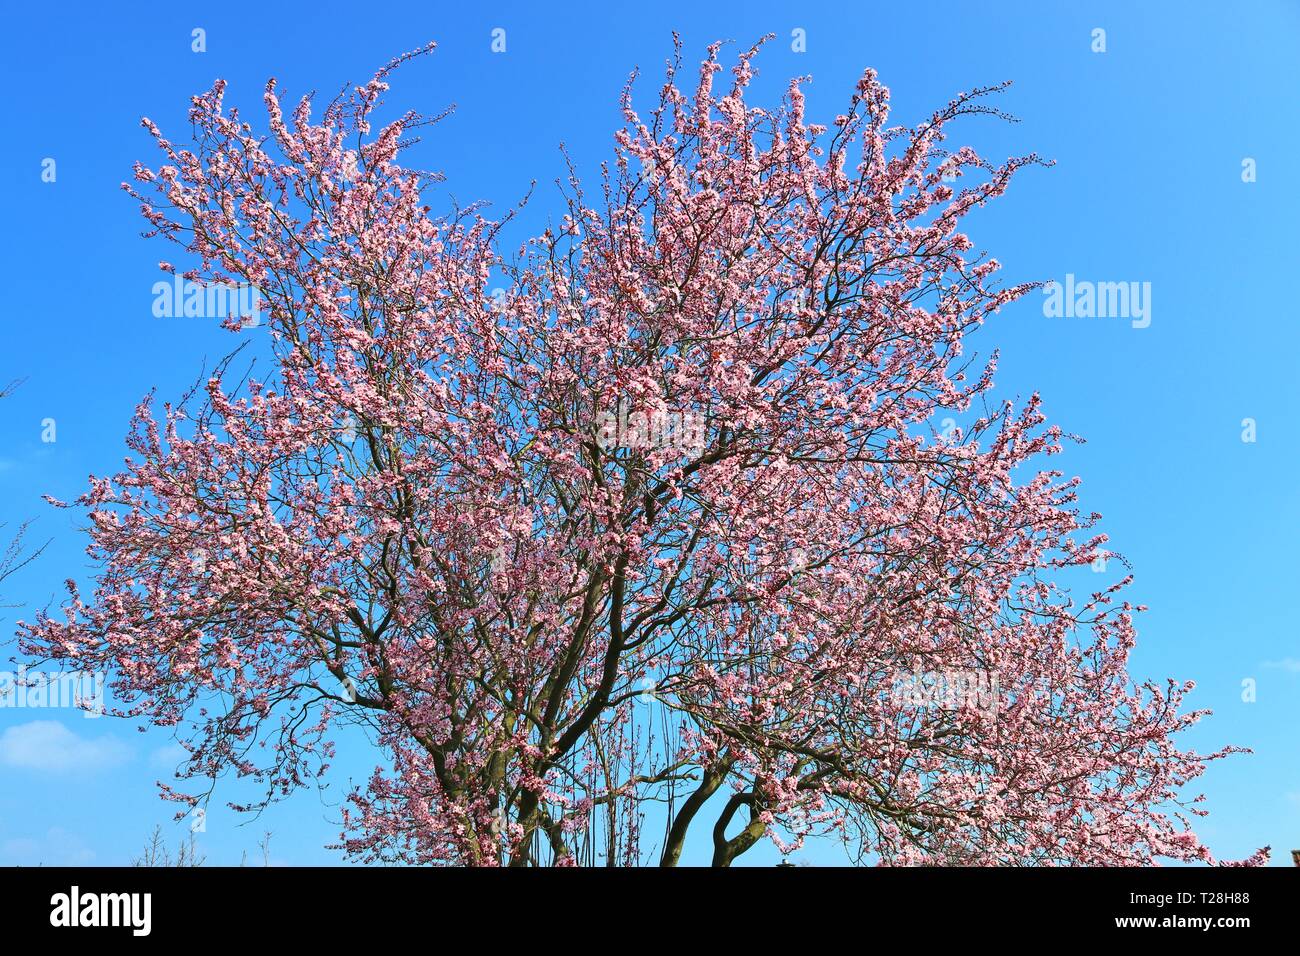 Beautiful blooming plum tree in spring full of pink blossoms Stock Photo